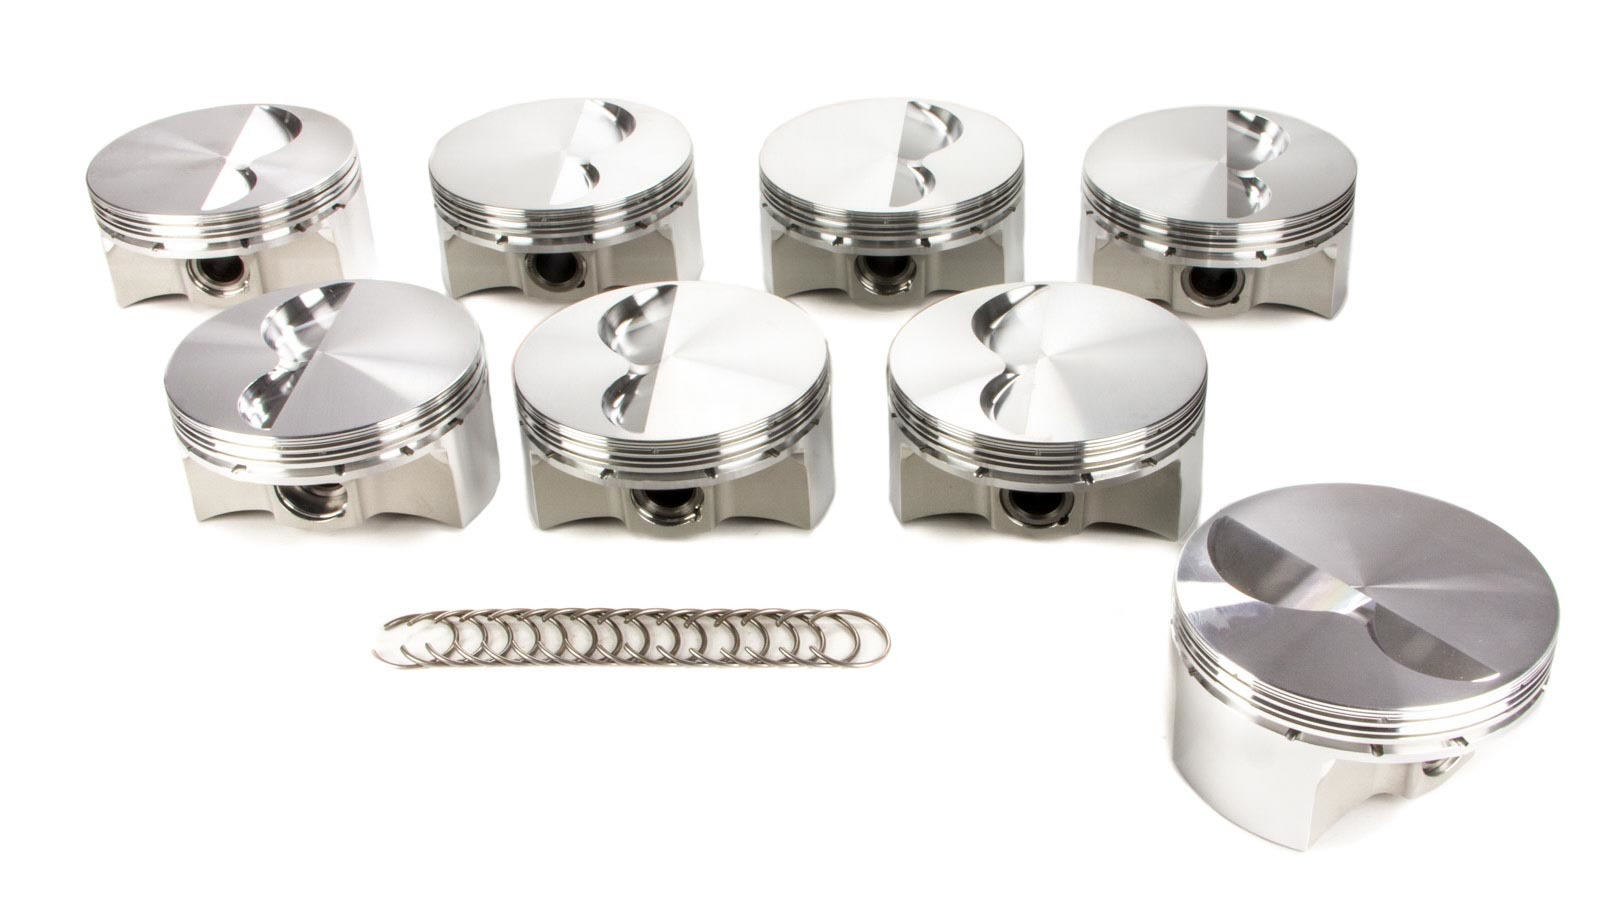 JE Pistons 258031 Piston, F.S.R. Tour Series GP, Forged, 4.045 in Bore, 0.043 in x 0.043 in x 3.0 mm Ring Grooves, Minus 5.00 cc, Small Block Chevy, Set of 8